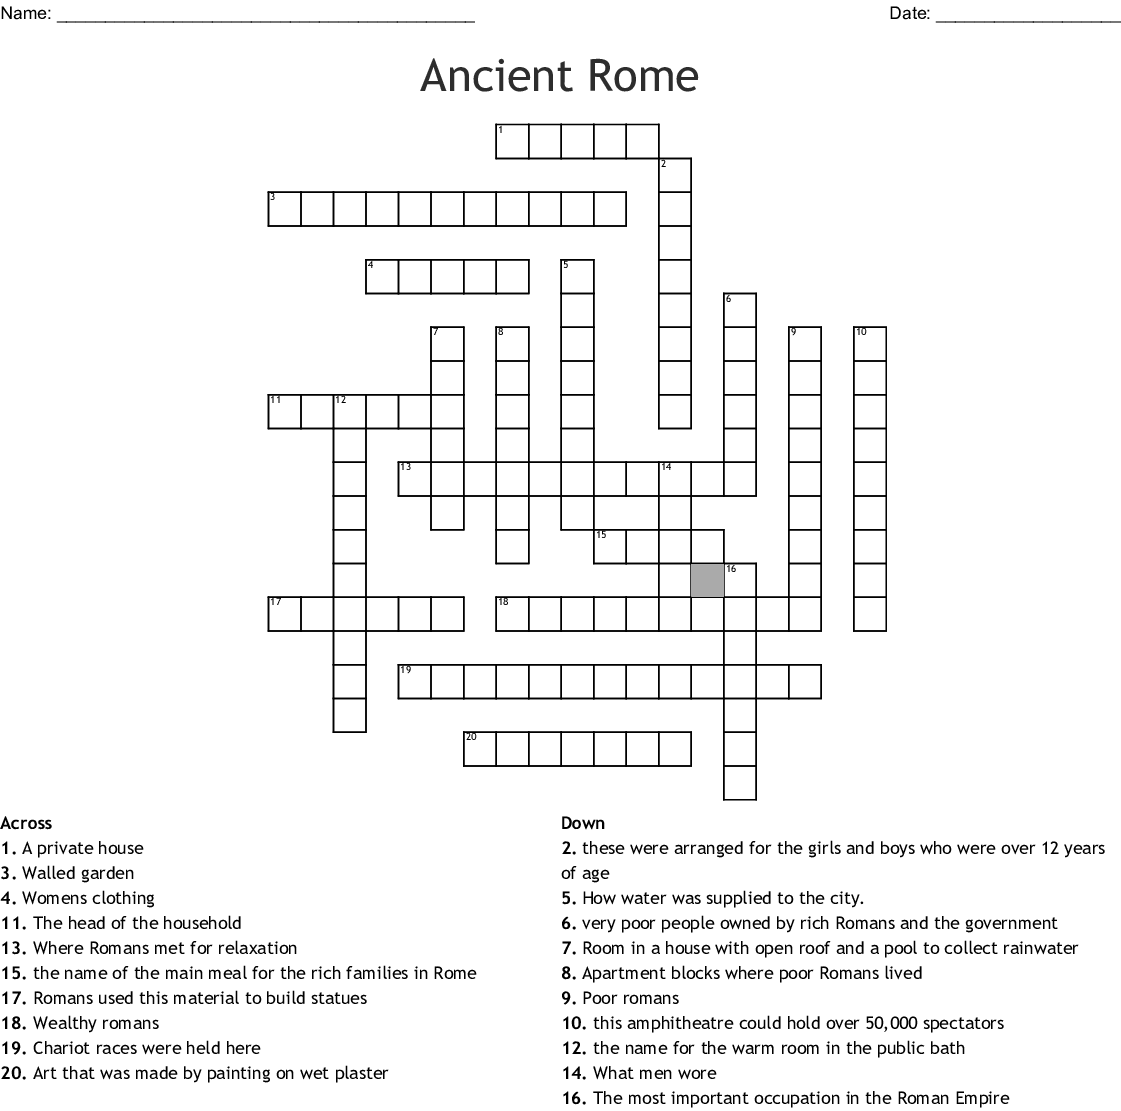 Answers To Crossword Puzzle Printable For Kids Ancient Rome